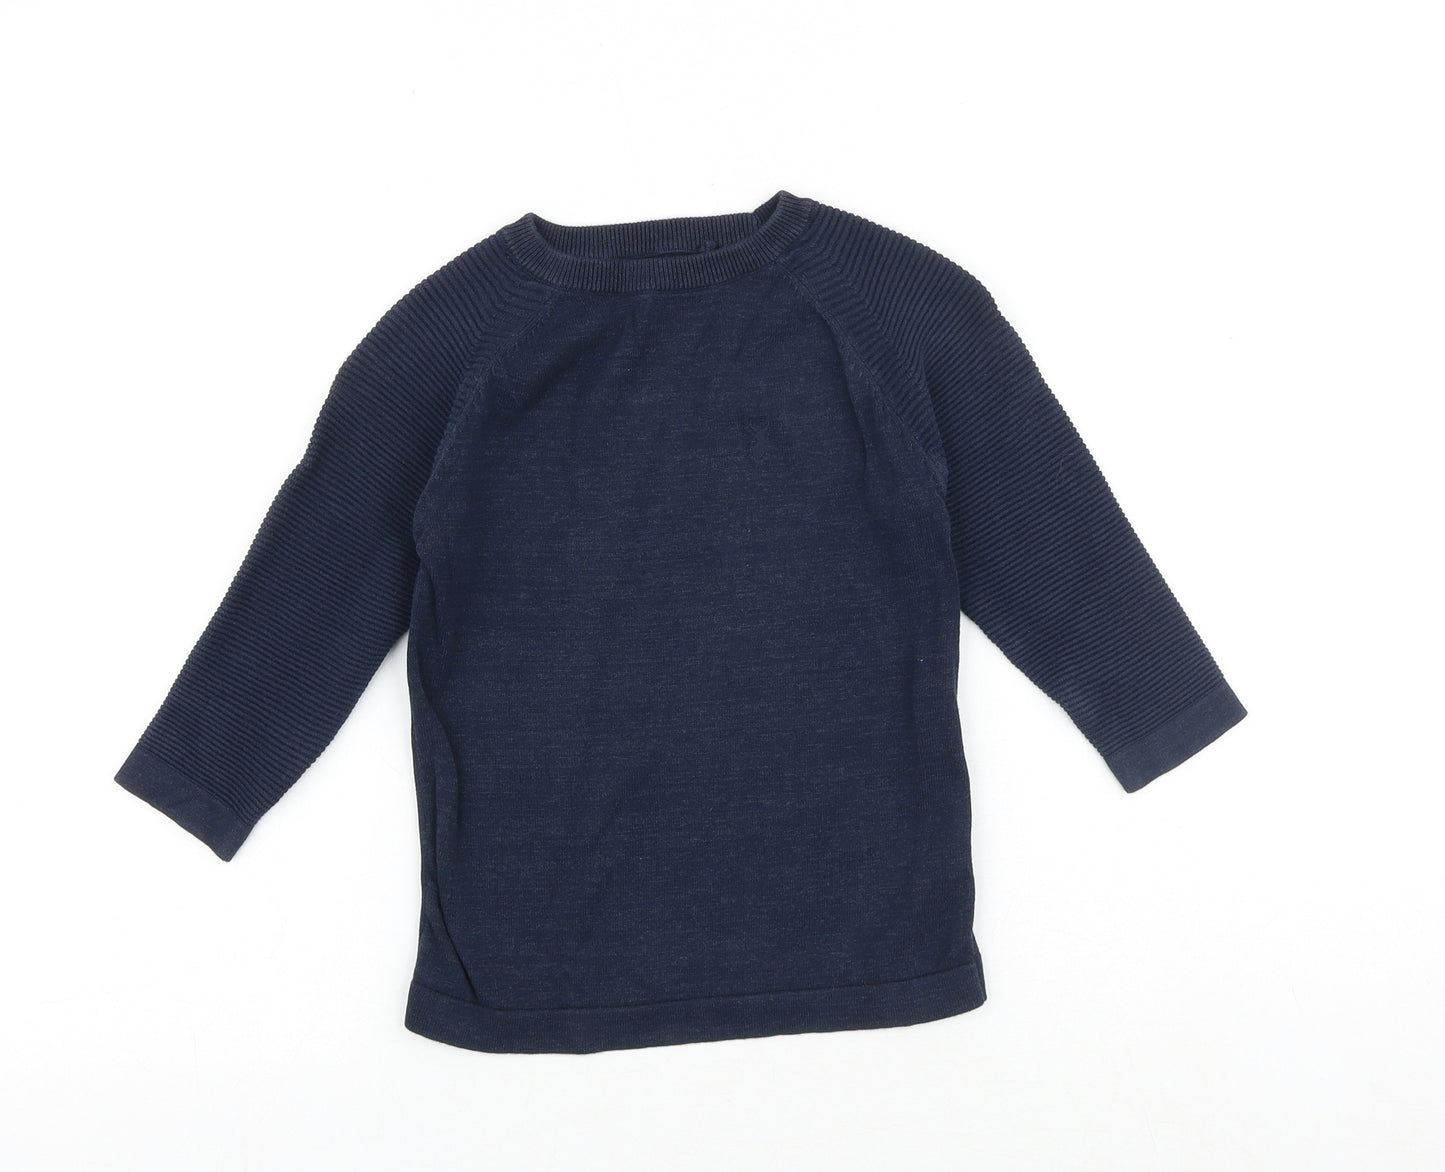 NEXT Boys Blue 100% Cotton Pullover Sweatshirt Size 5 Years Pullover